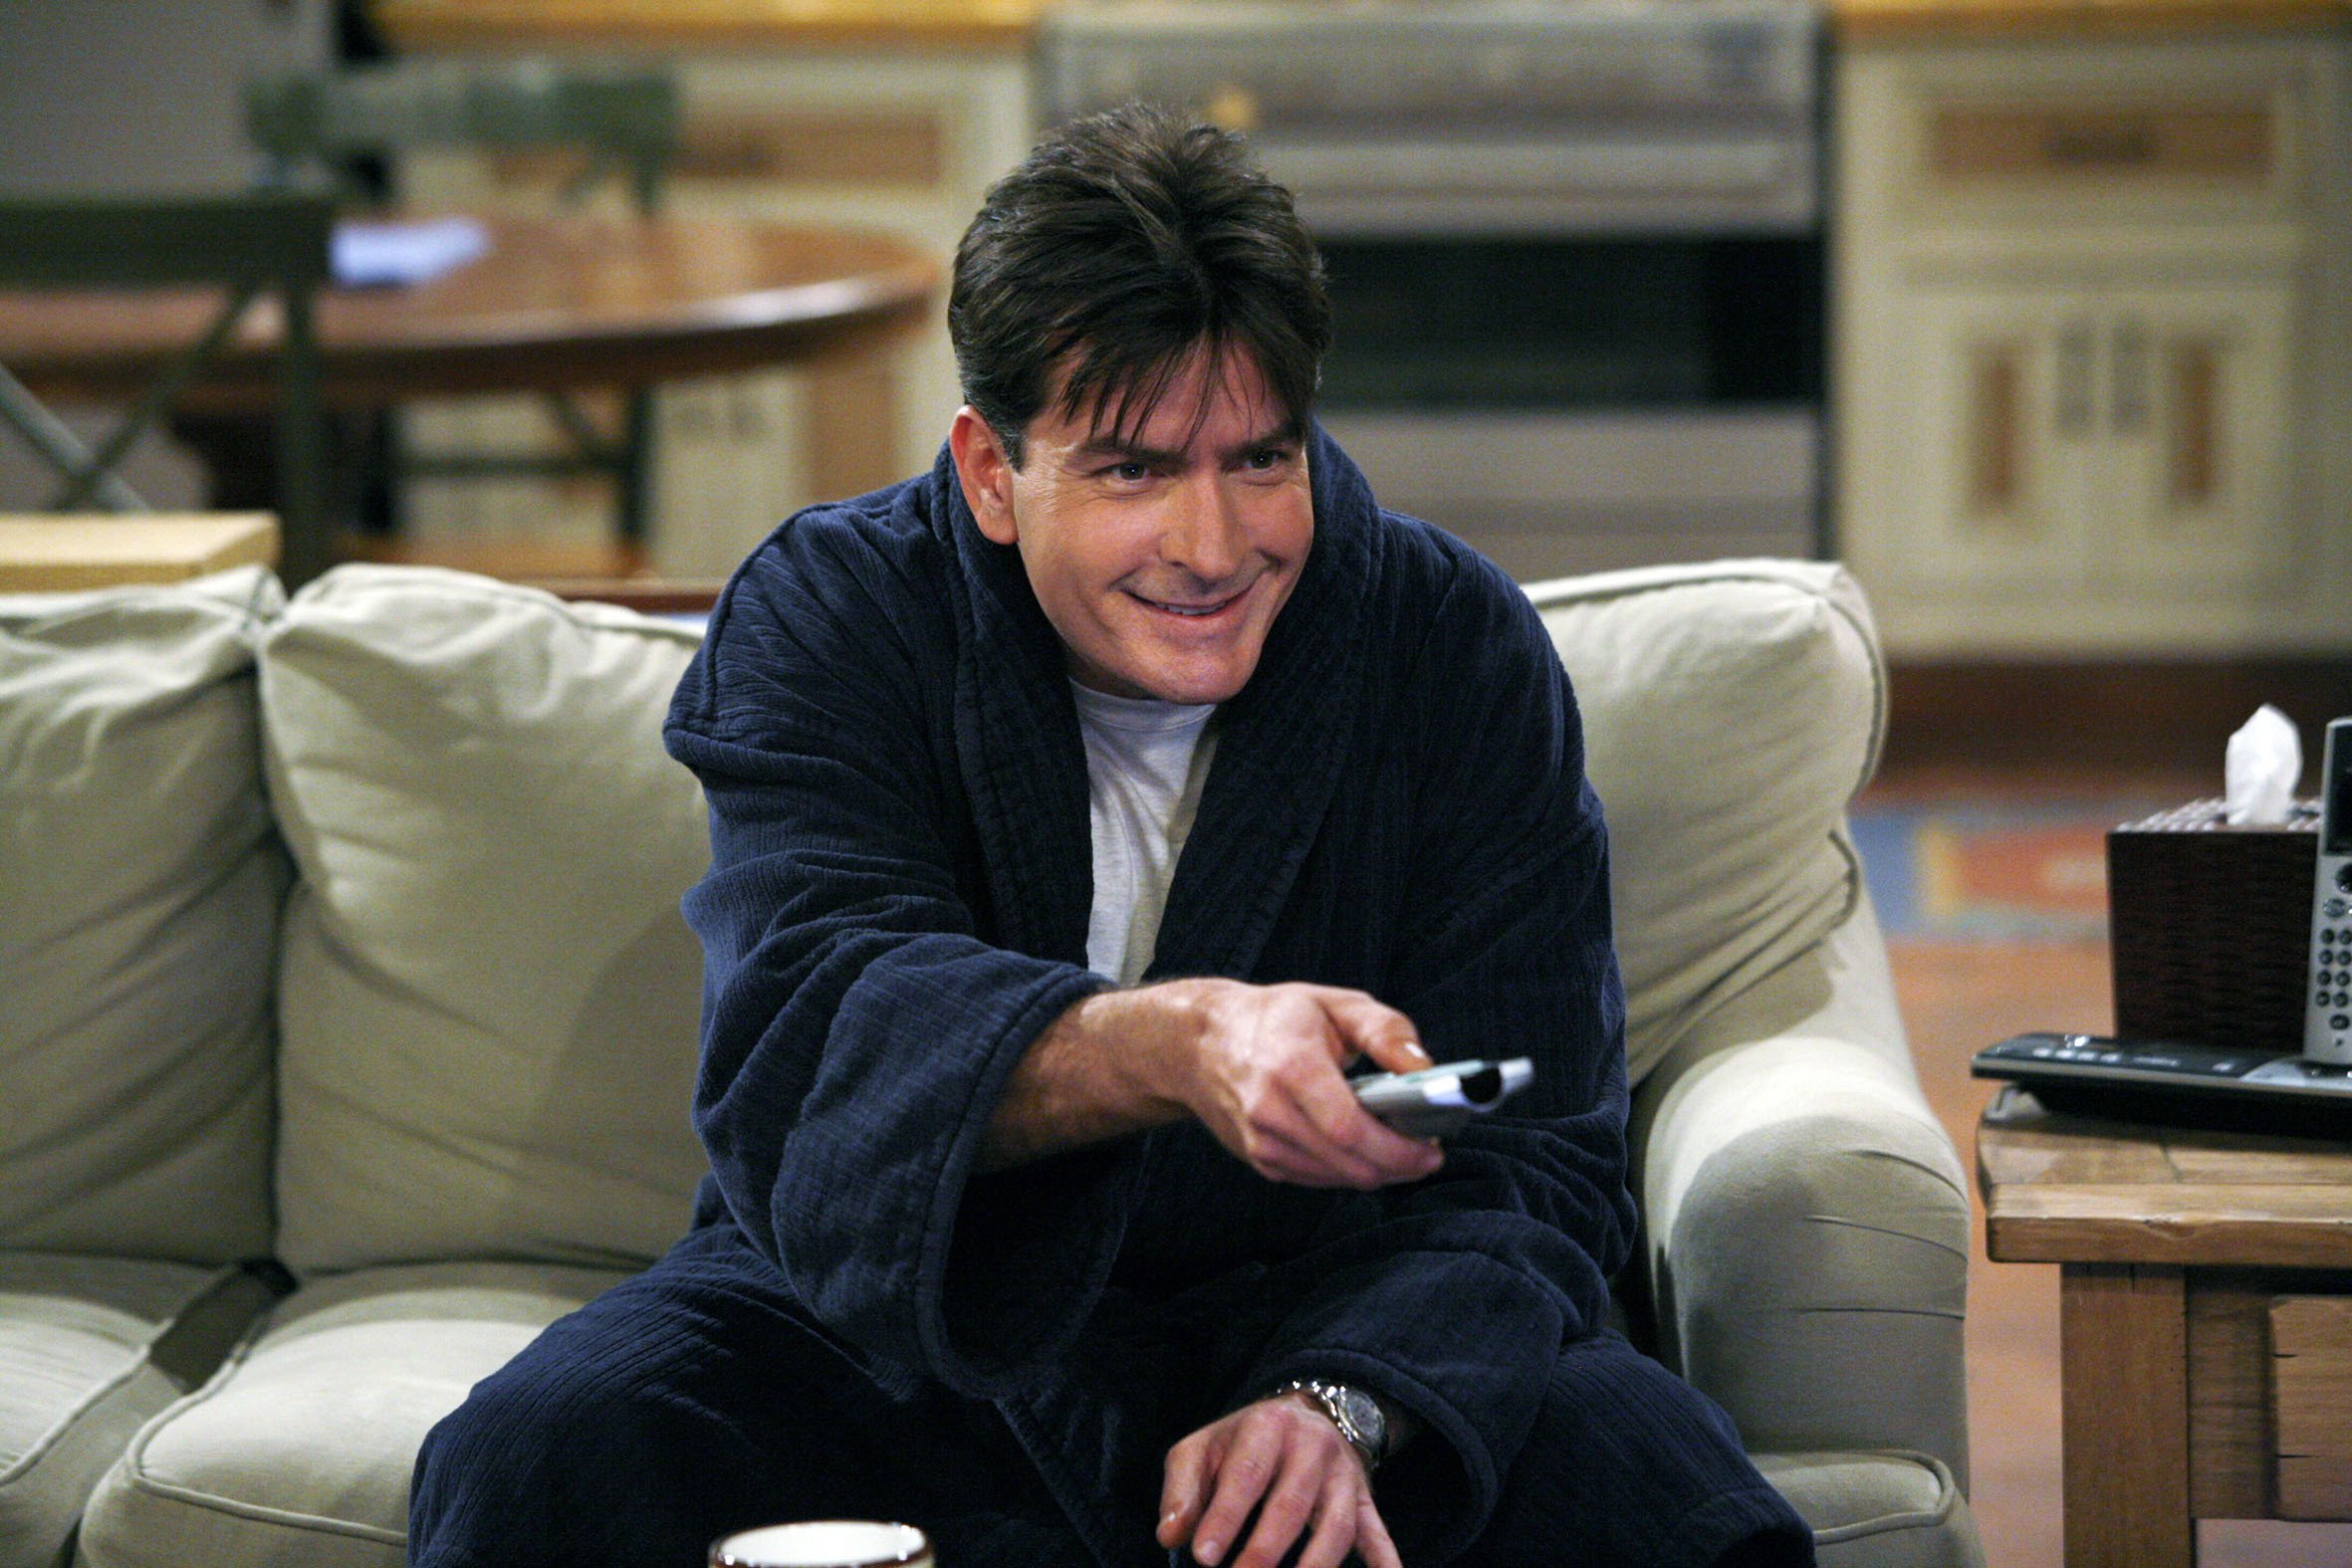 Charlie Sheen watches TV in a scene from Two and a Half Men